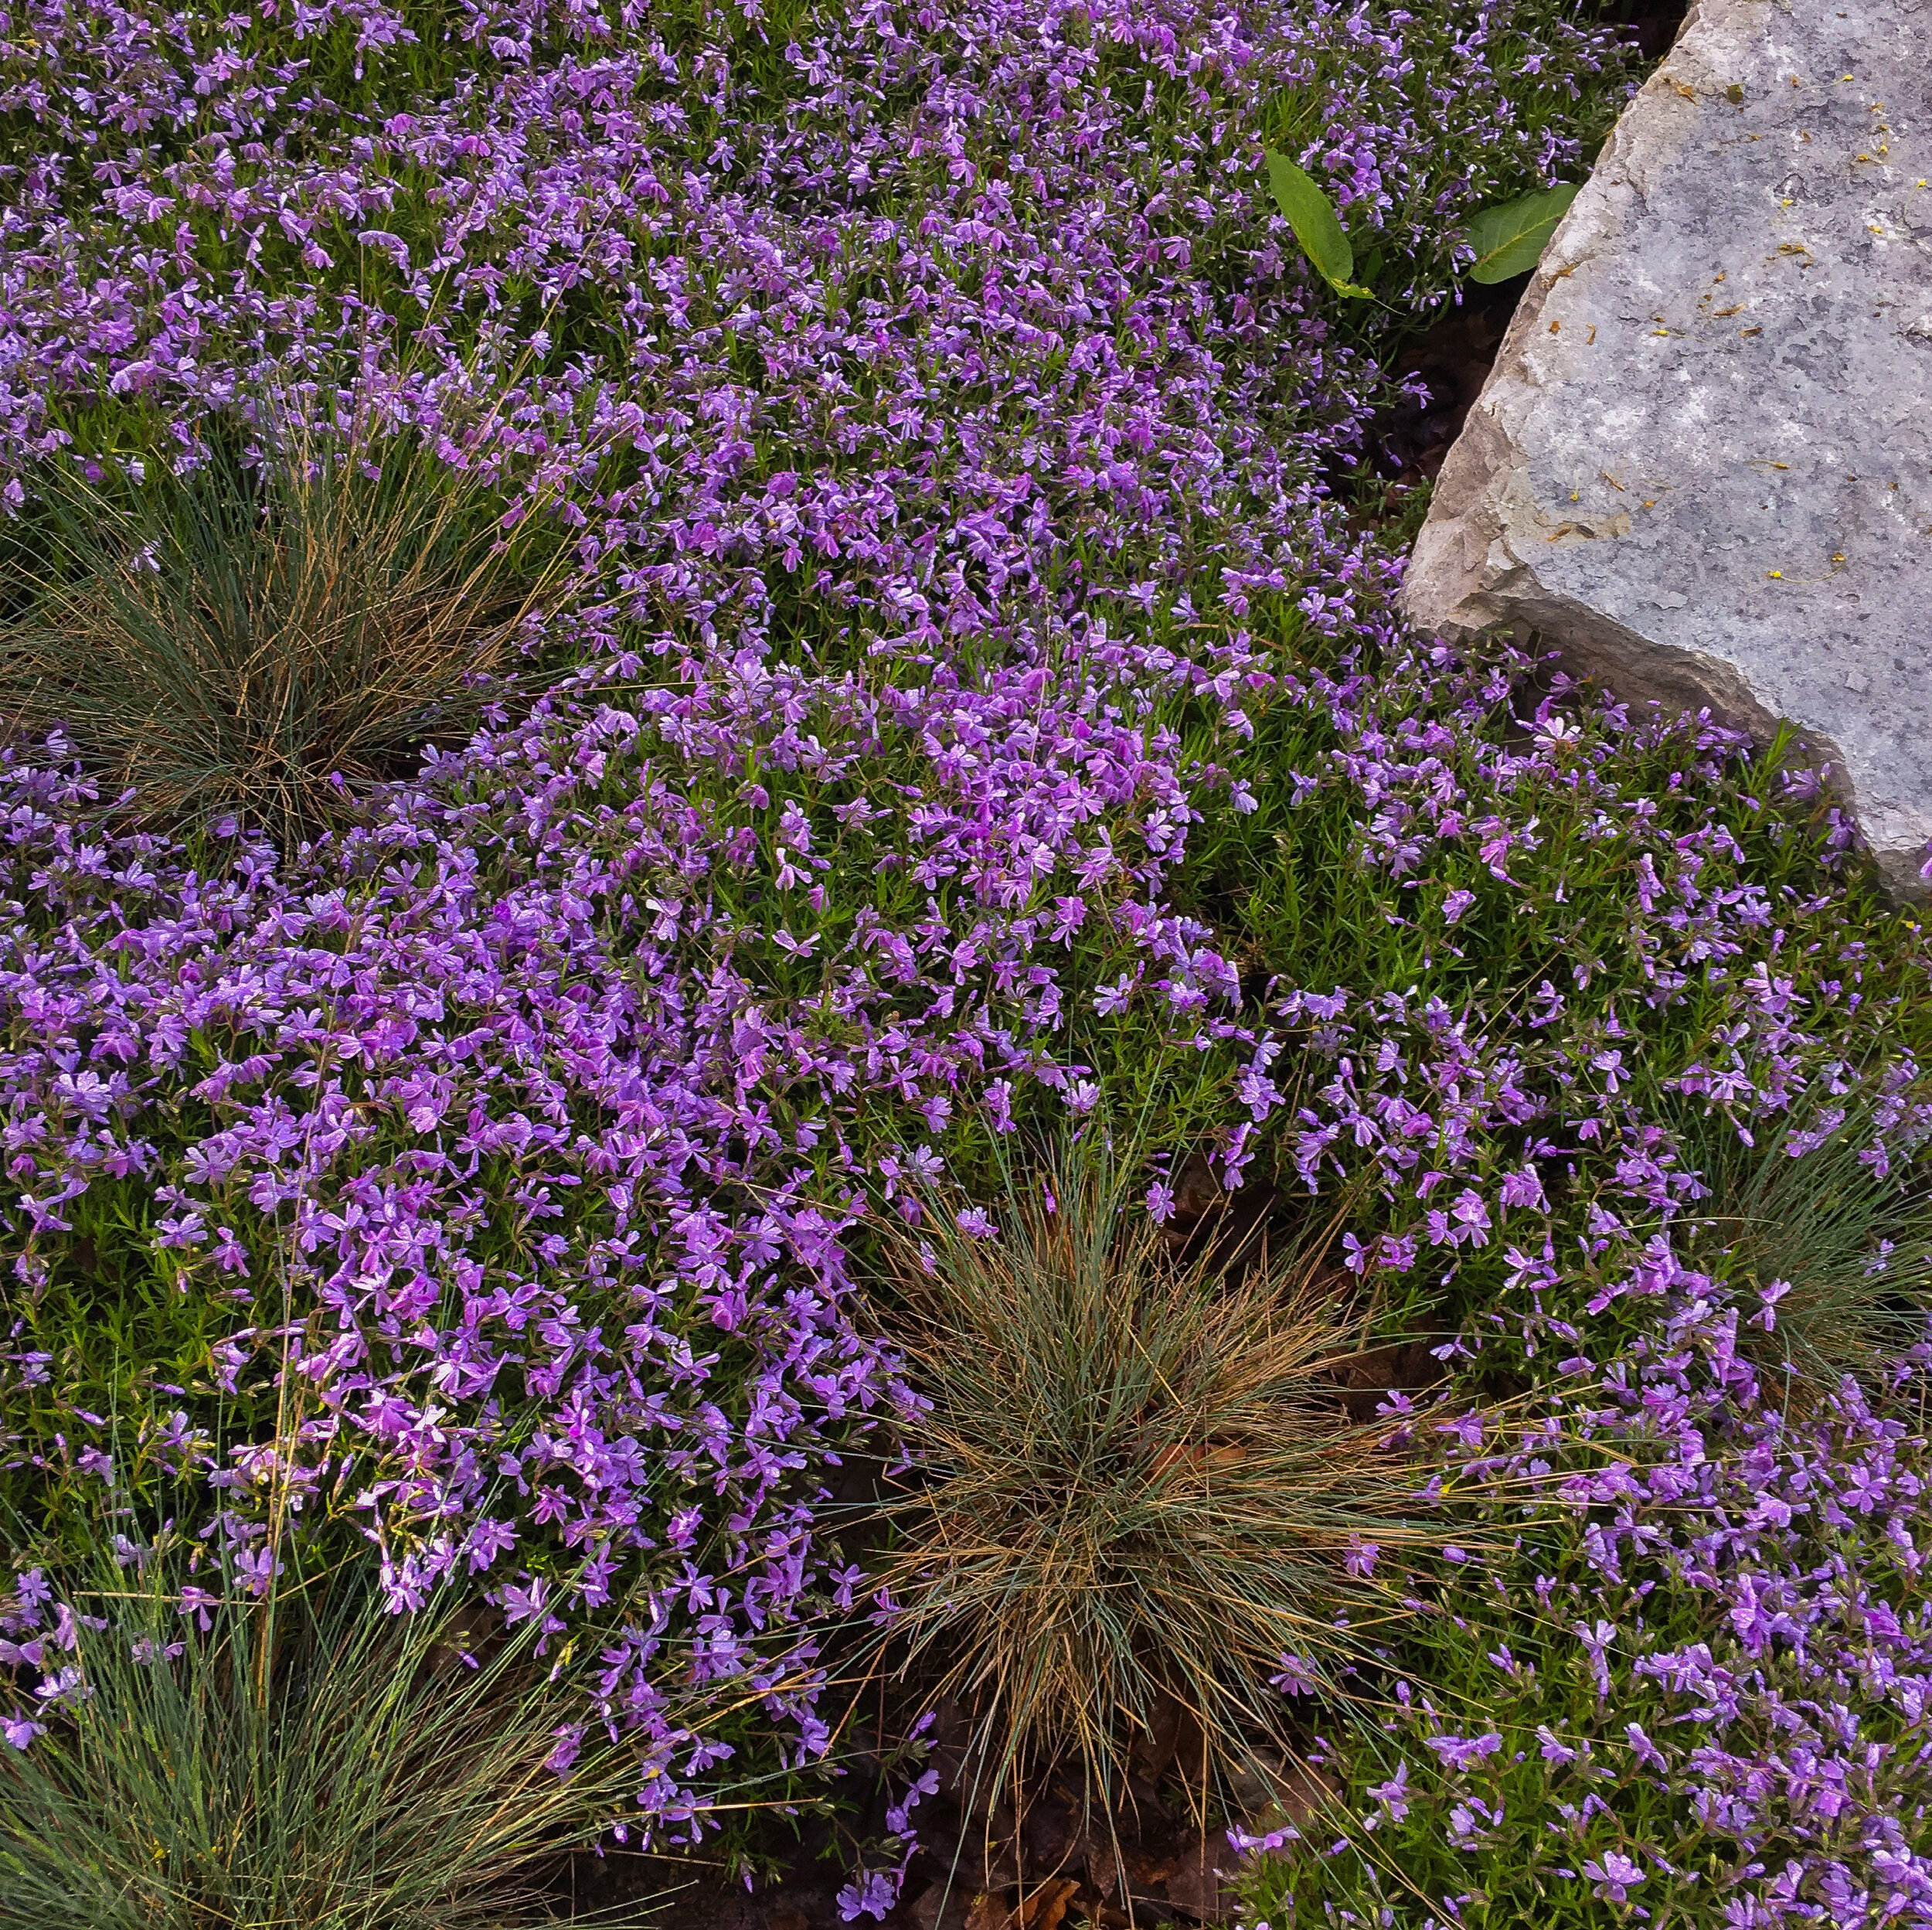 Creeping phlox among the rocks and grasses in our front garden.